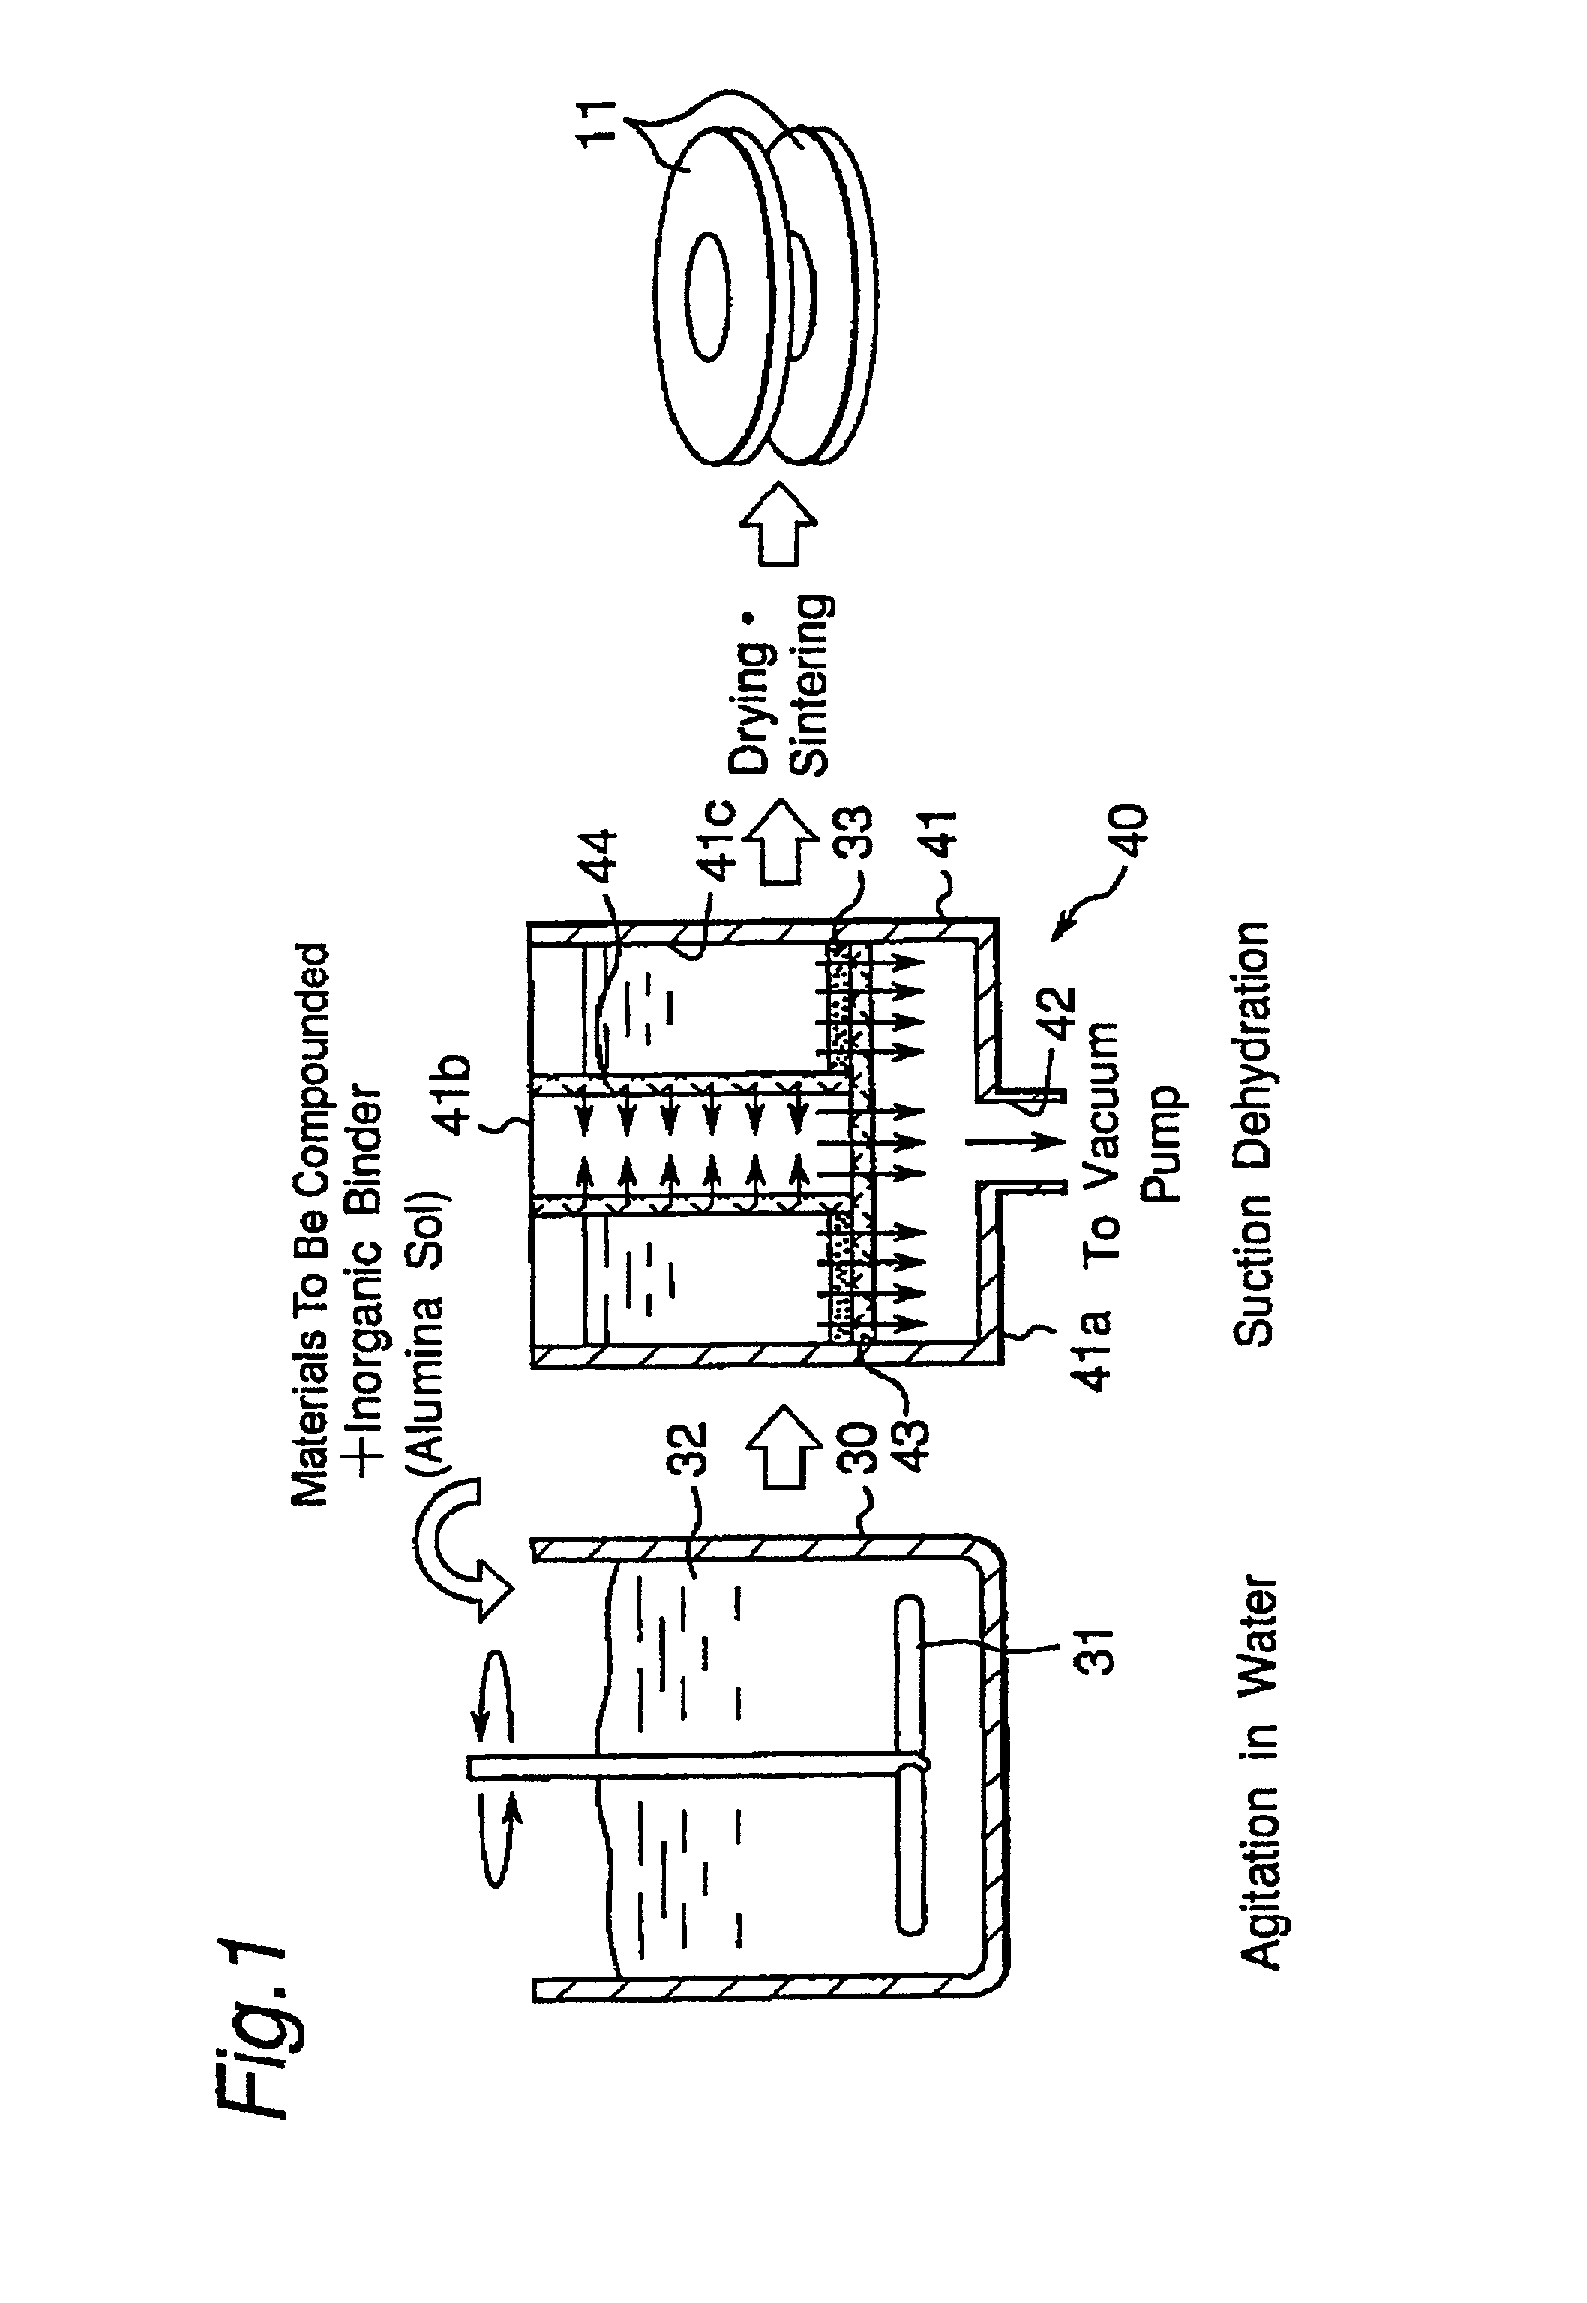 Method of manufacturing preform for compounding use